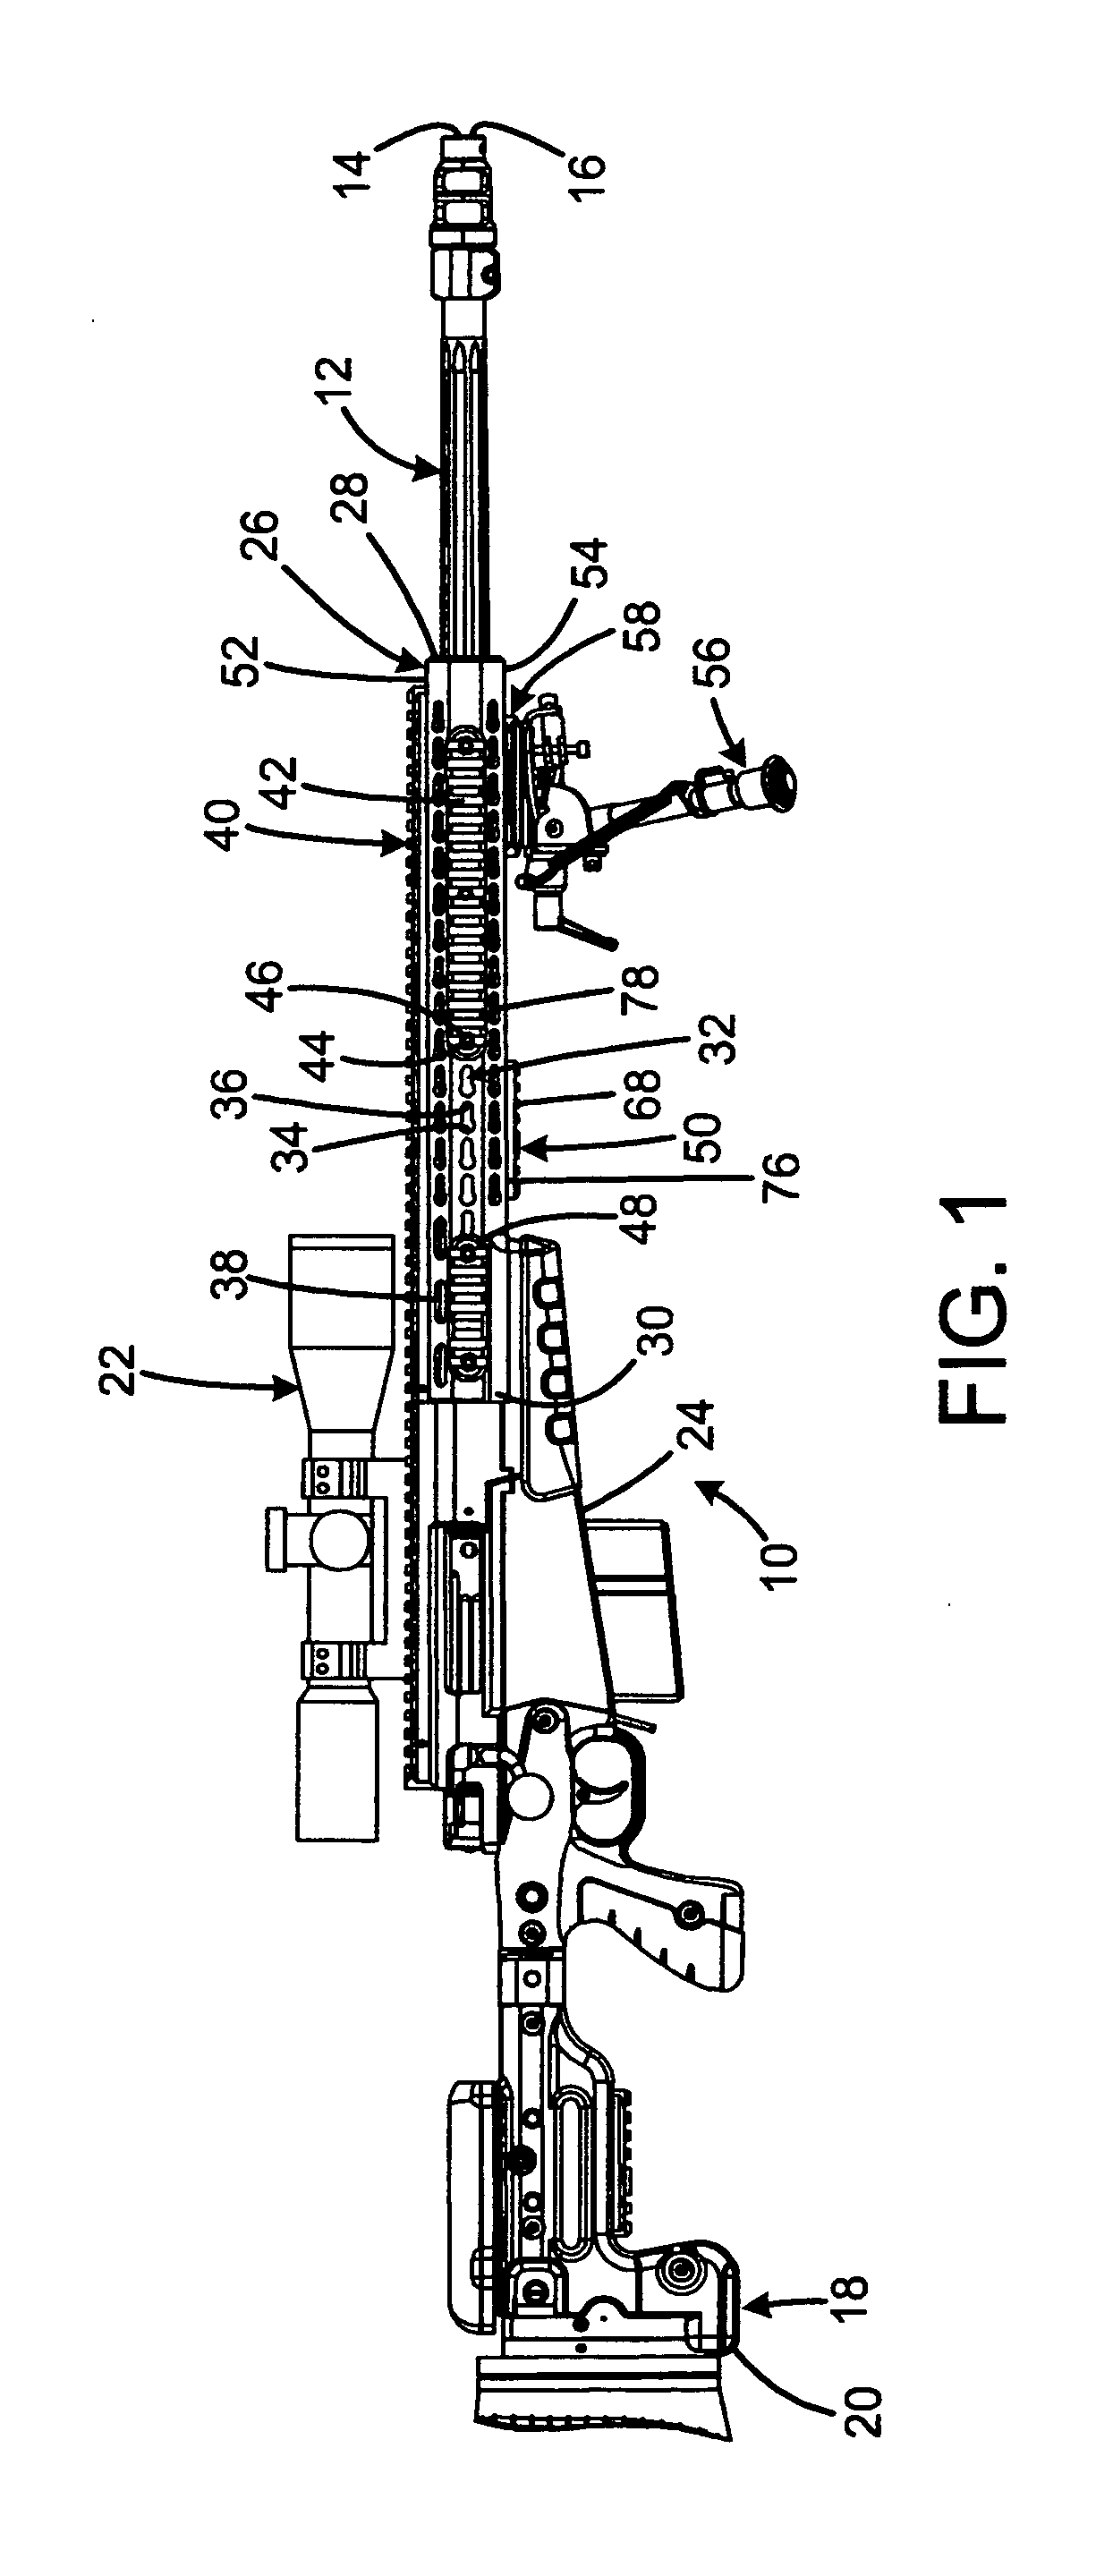 Firearm with keyhole-shaped rail mounting points